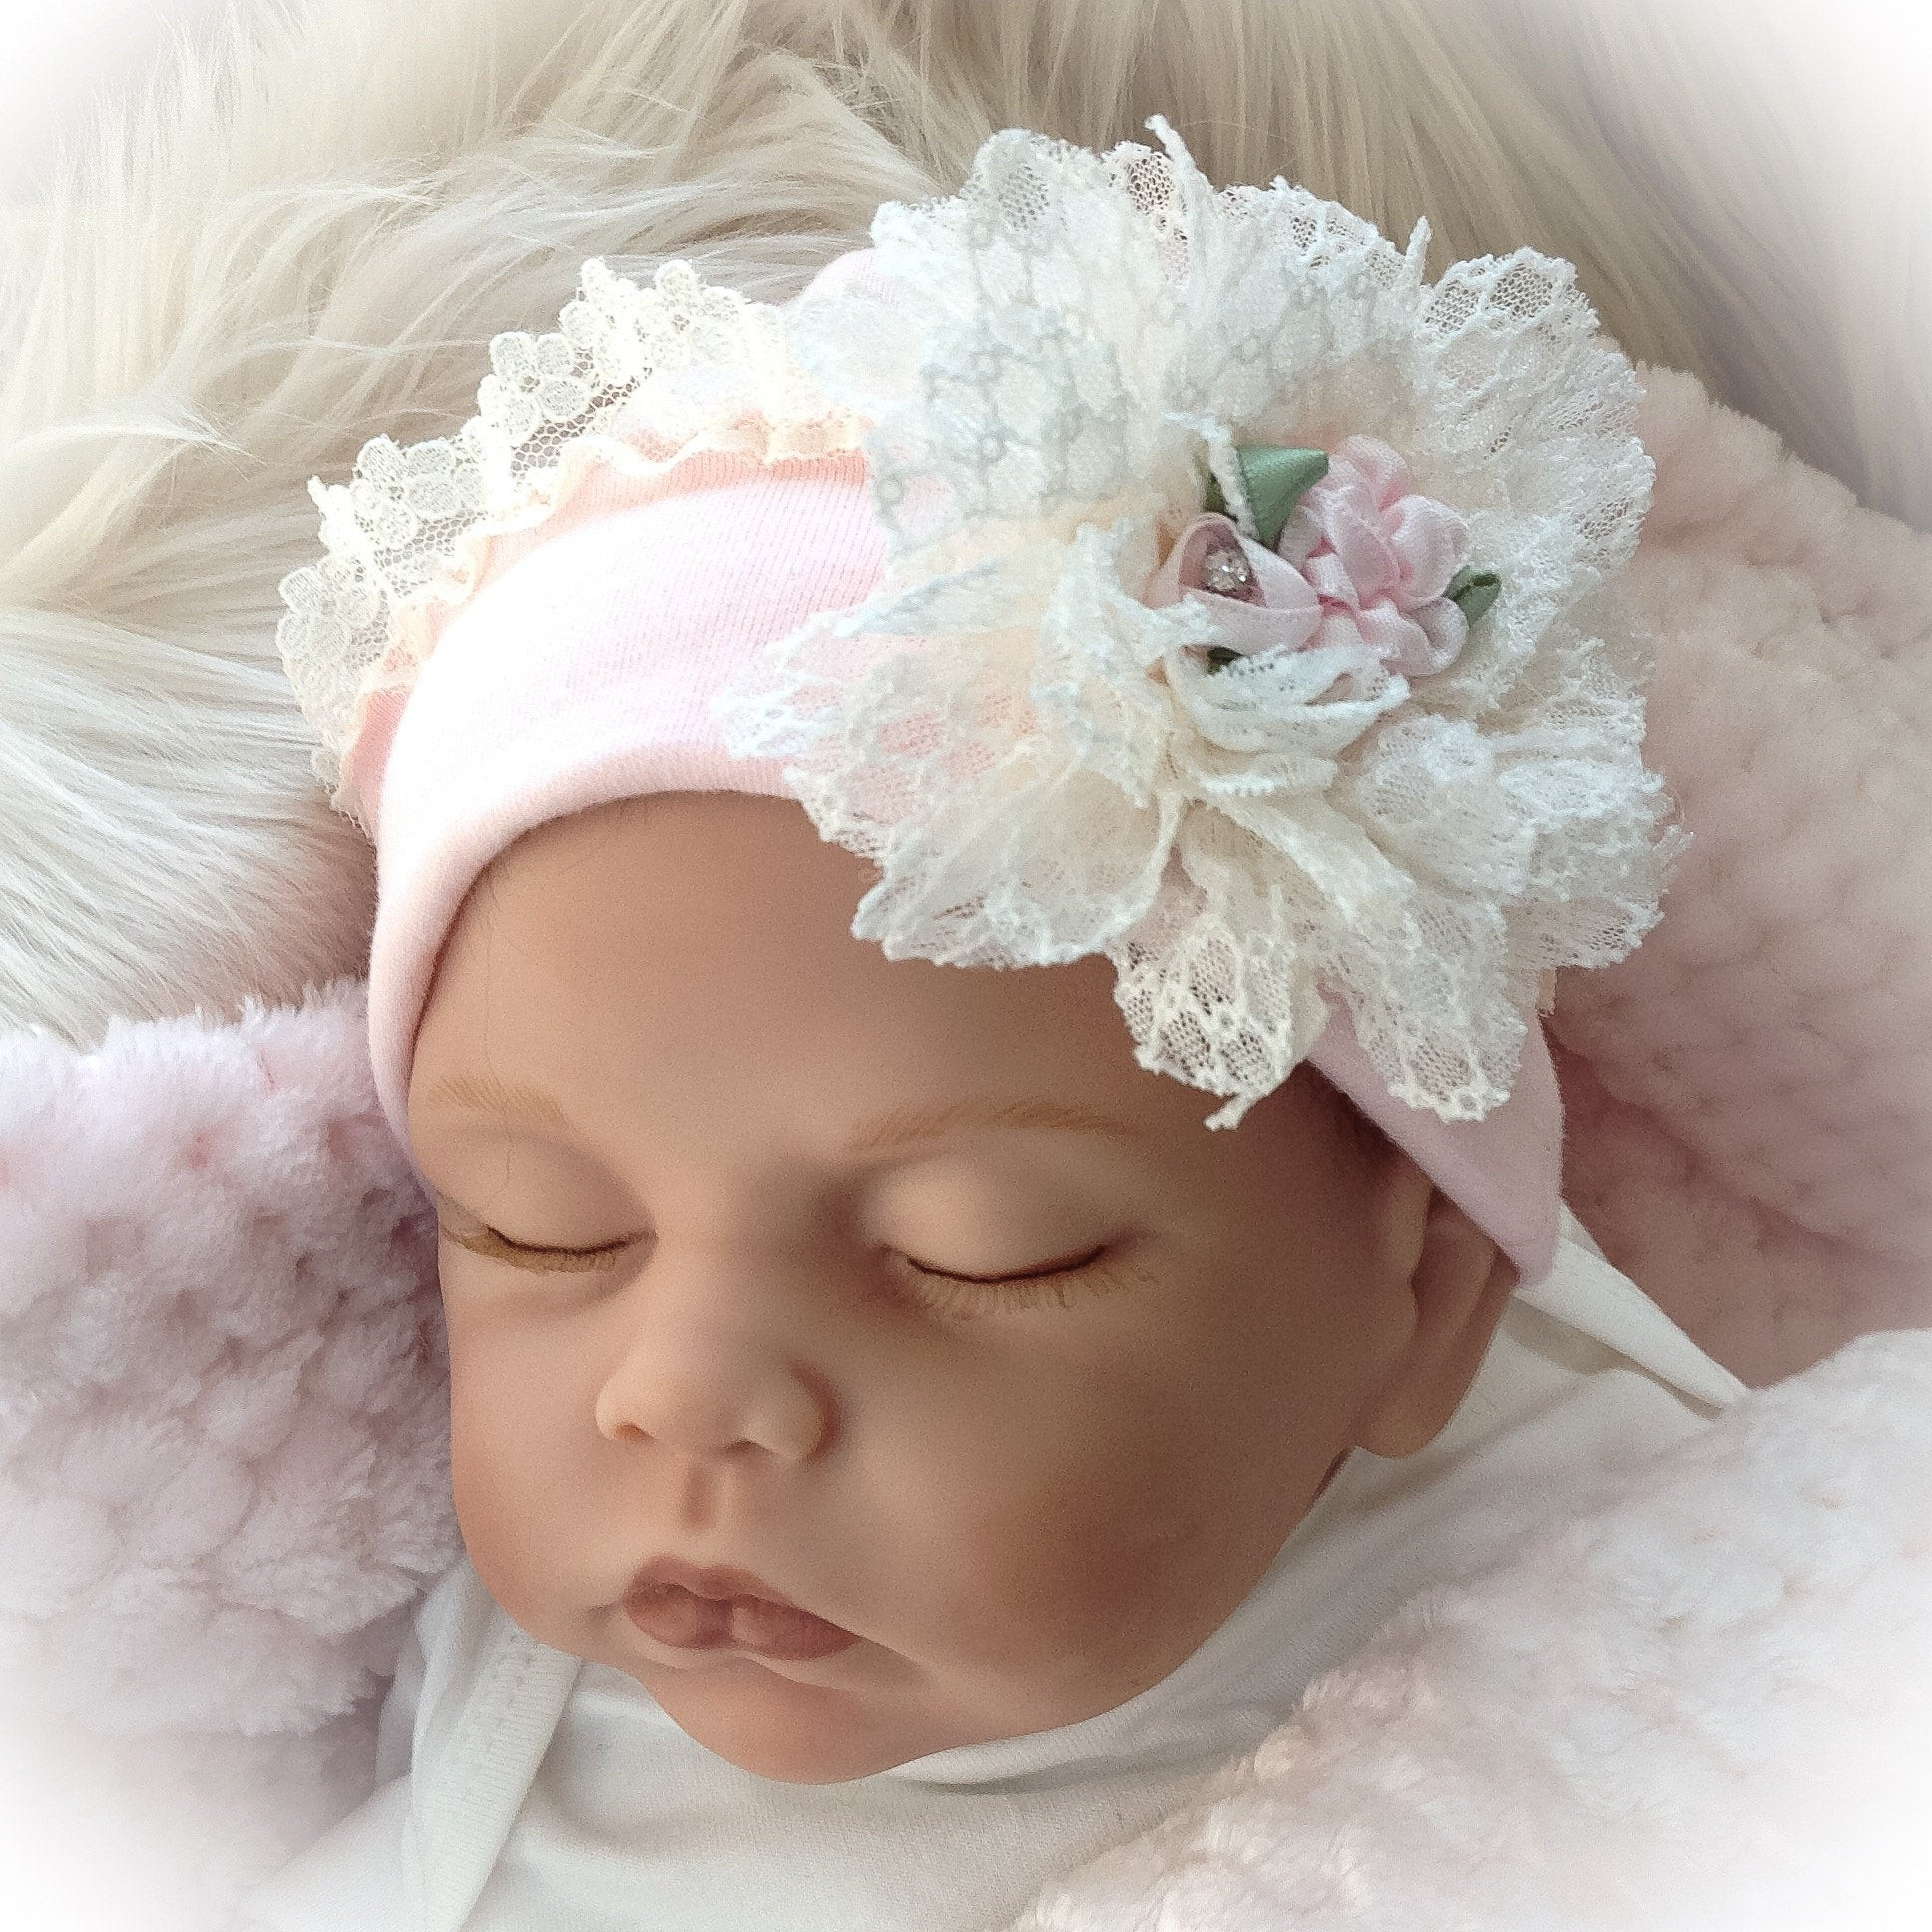 Personalized Baby Gift Etsy
 Unique Baby Gift Newborn Girl Hat Baby Hospital Hat Baby